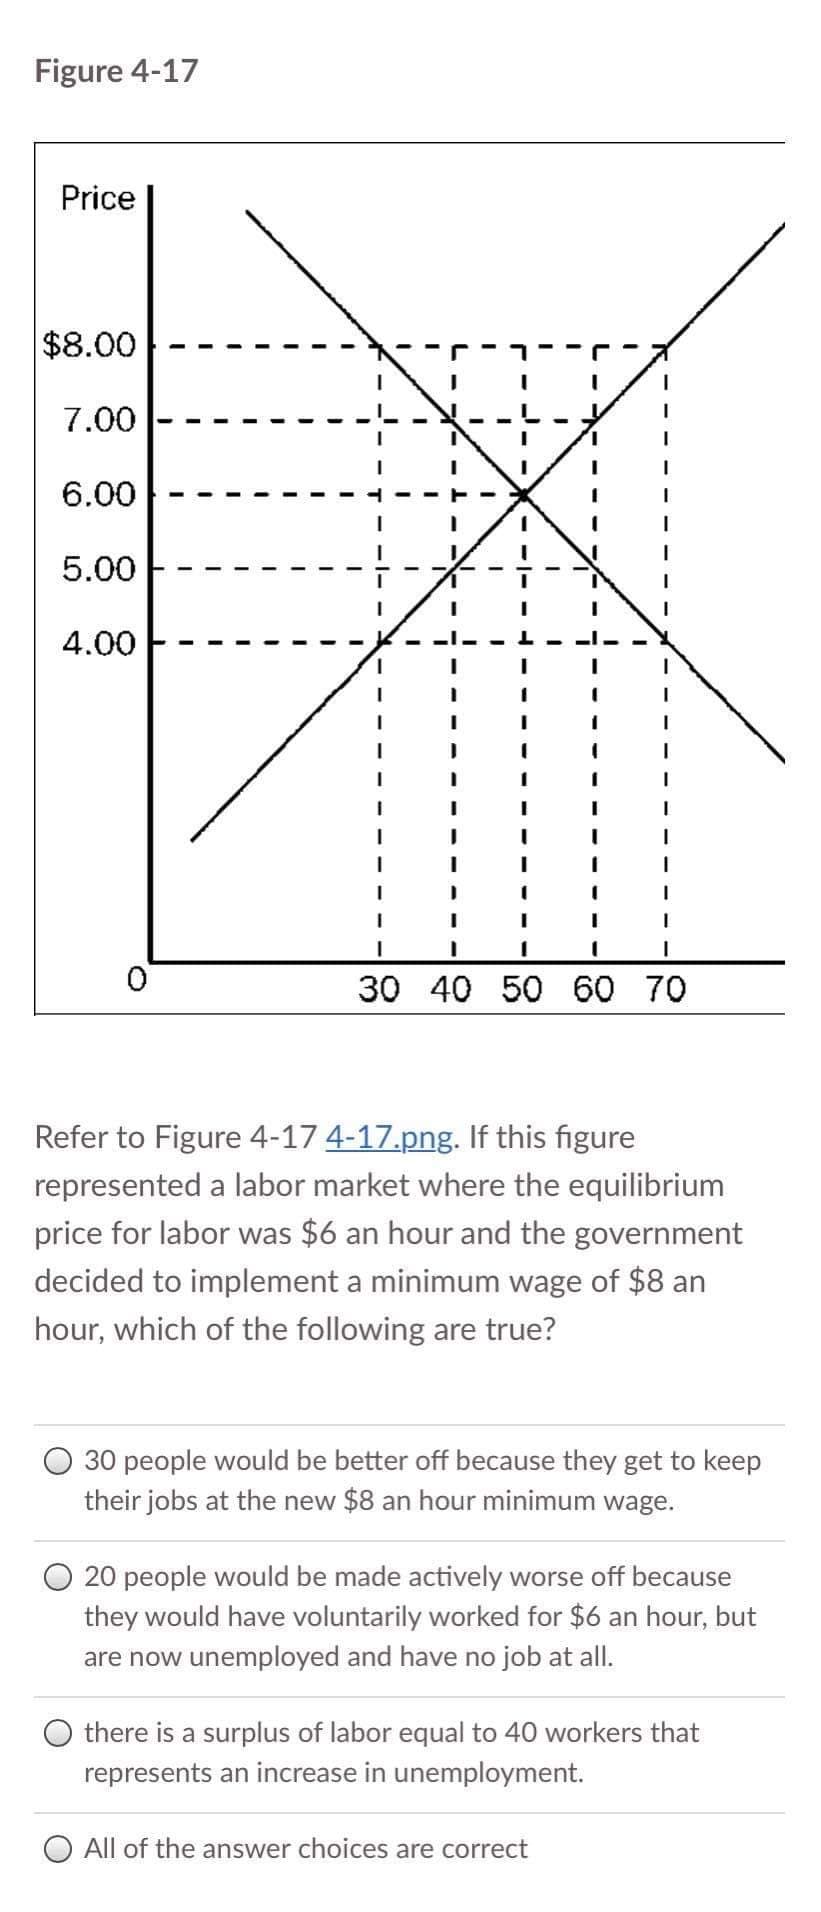 Figure 4-17
Price
$8.00
7.00
6.00
5.00
4.00
30 40 50 60 70
Refer to Figure 4-17 4-17.png. If this figure
represented a labor market where the equilibrium
price for labor was $6 an hour and the government
decided to implement a minimum wage of $8 an
hour, which of the following are true?
30 people would be better off because they get to keep
their jobs at the new $8 an hour minimum wage.
O 20 people would be made actively worse off because
they would have voluntarily worked for $6 an hour, but
are now unemployed and have no job at all.
there is a surplus of labor equal to 40 workers that
represents an increase in unemployment.
O All of the answer choices are correct
